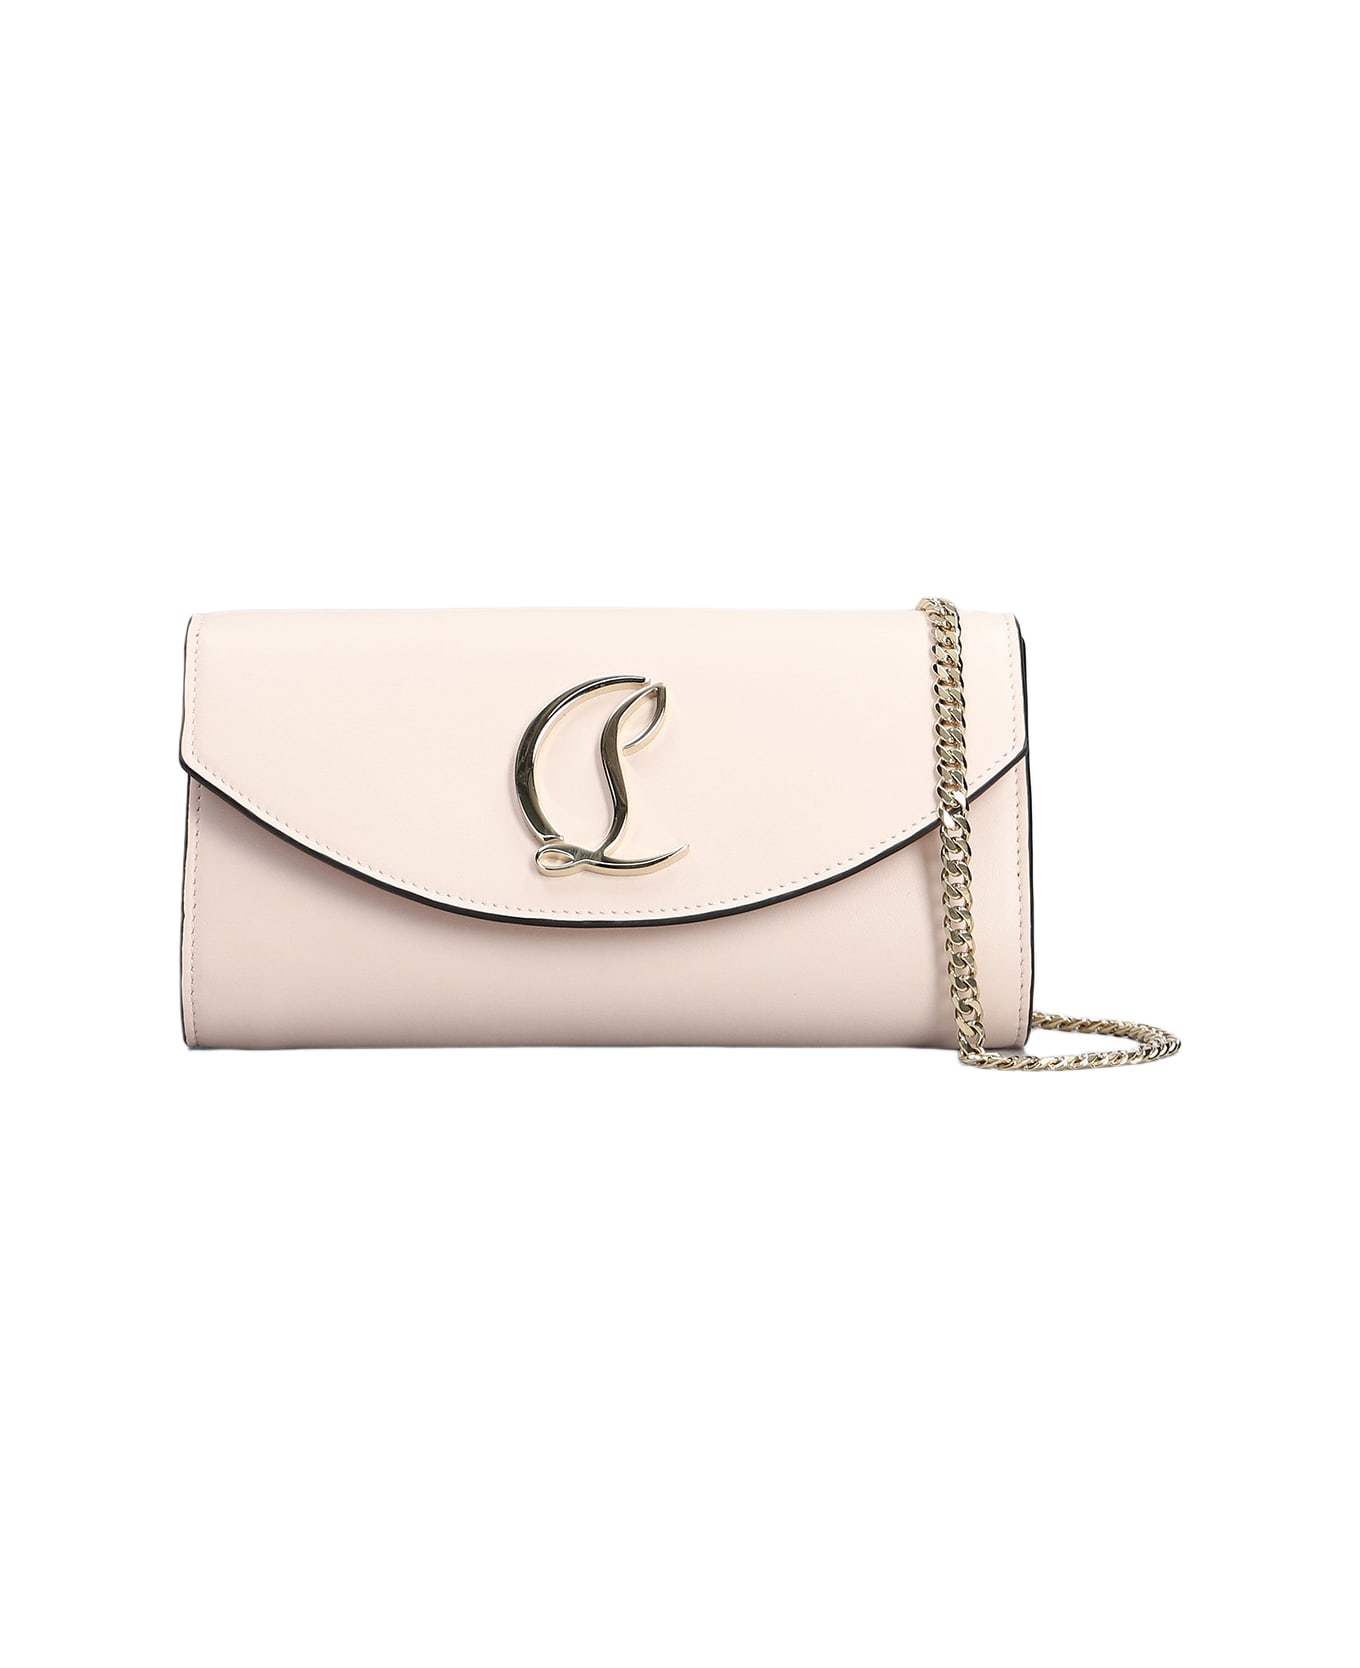 Christian Louboutin Wallet On Chain In Calf Leather - LECHE GOLD